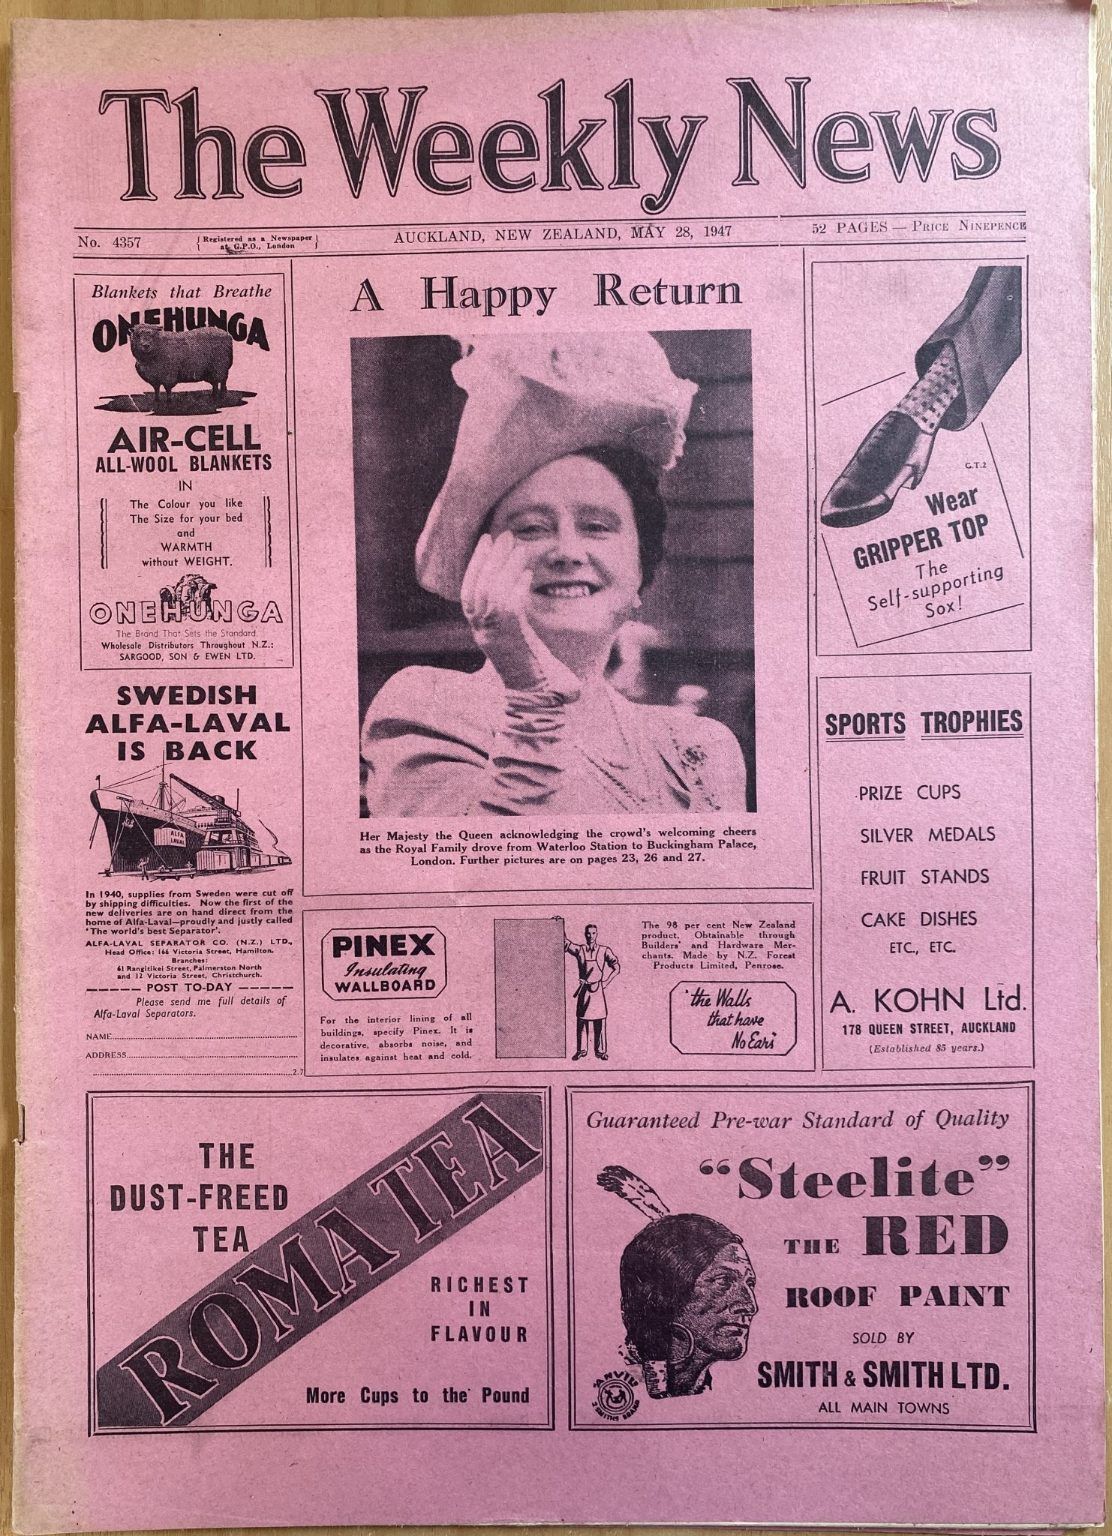 OLD NEWSPAPER: The Weekly News, No. 4357, 28 May 1947